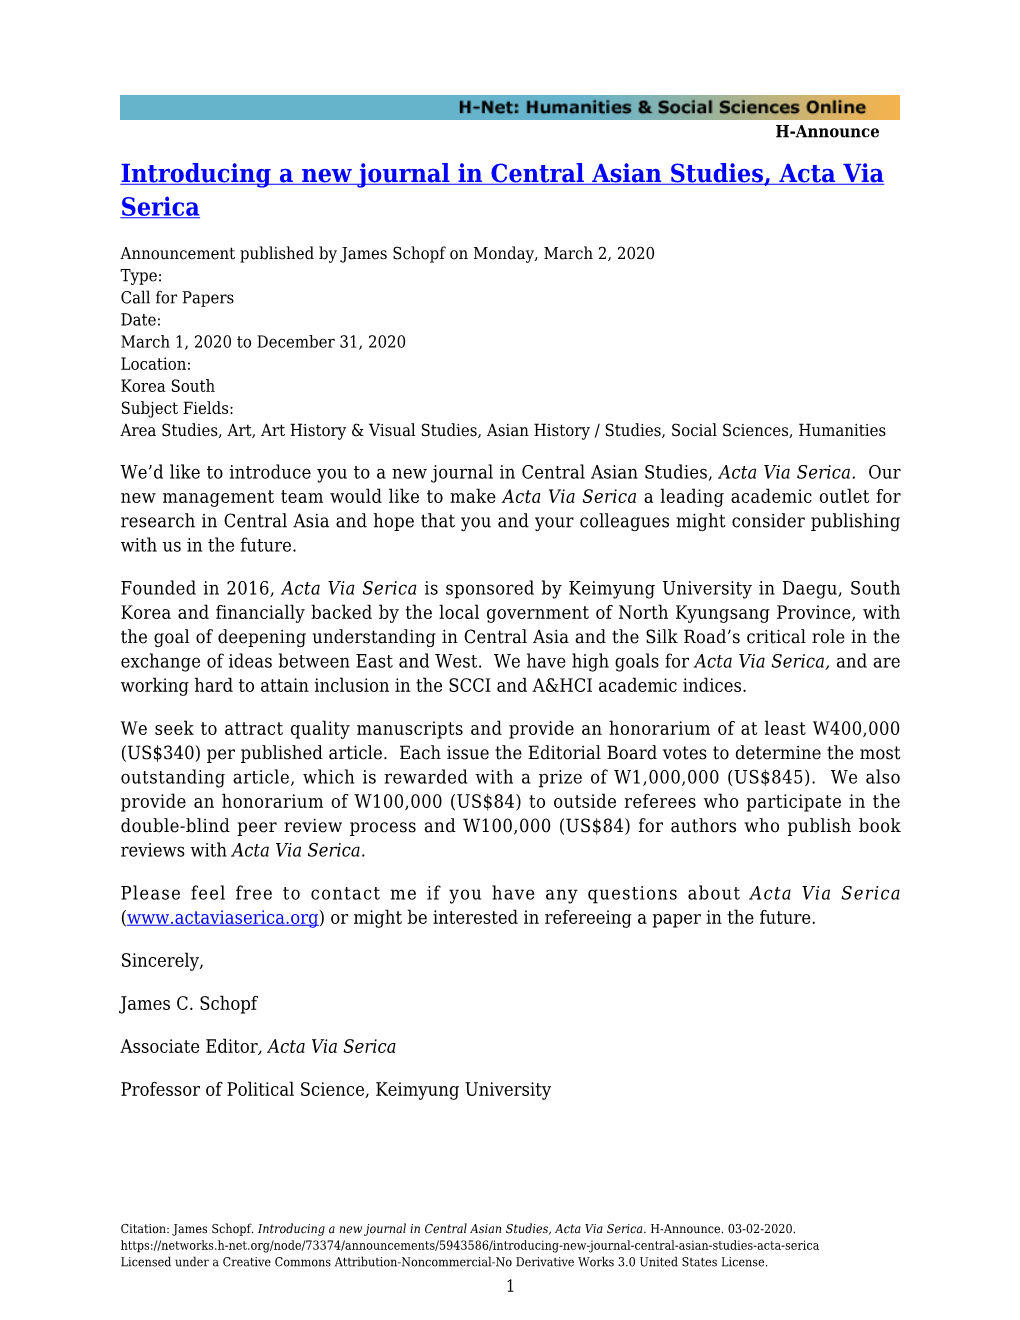 Introducing a New Journal in Central Asian Studies, Acta Via Serica